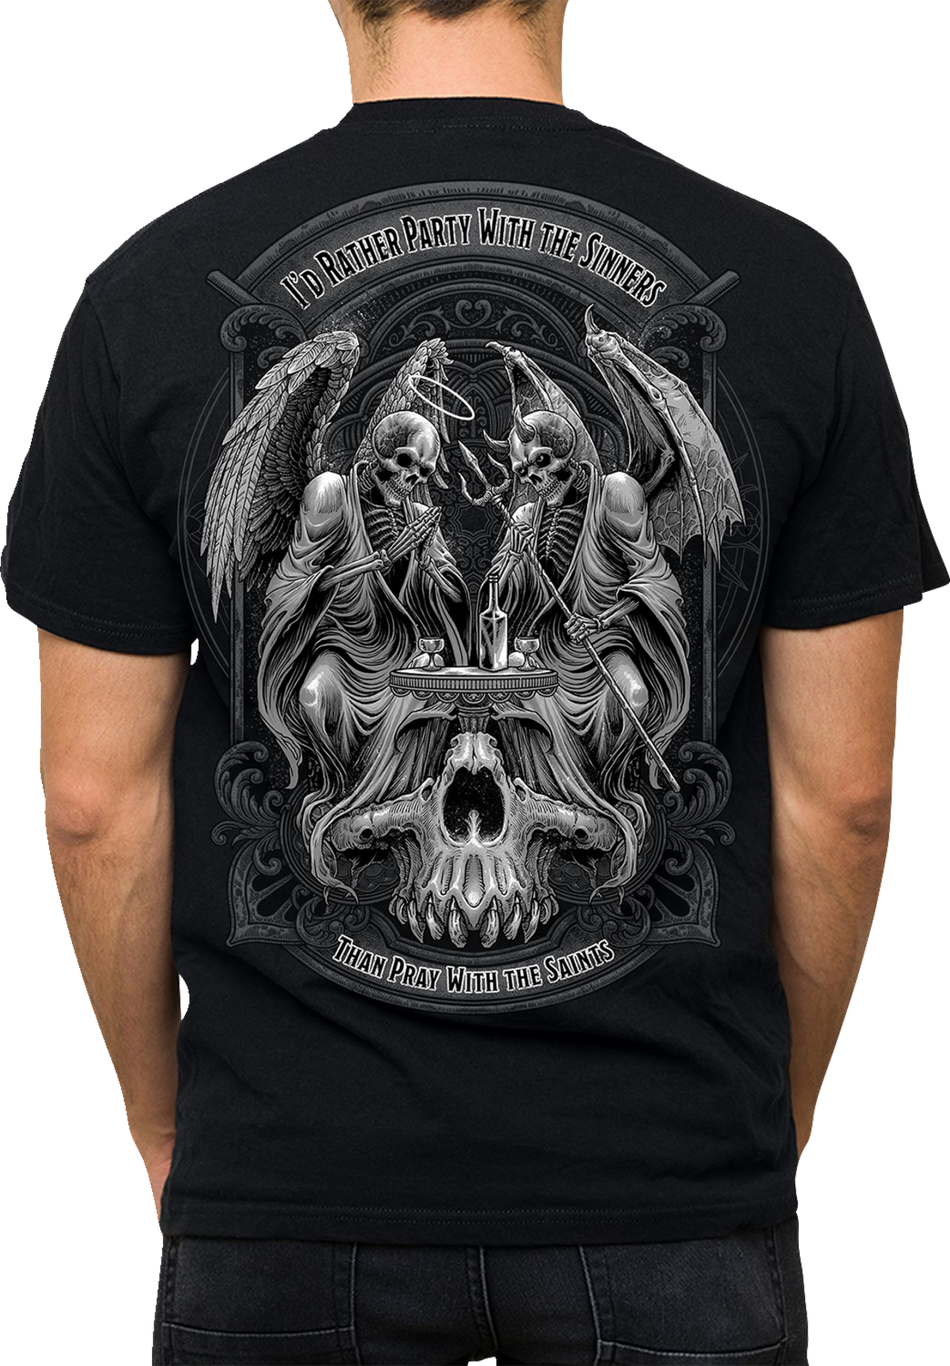 LETHAL THREAT Party with the Sinners T-Shirt - Black - XL LT20905XL